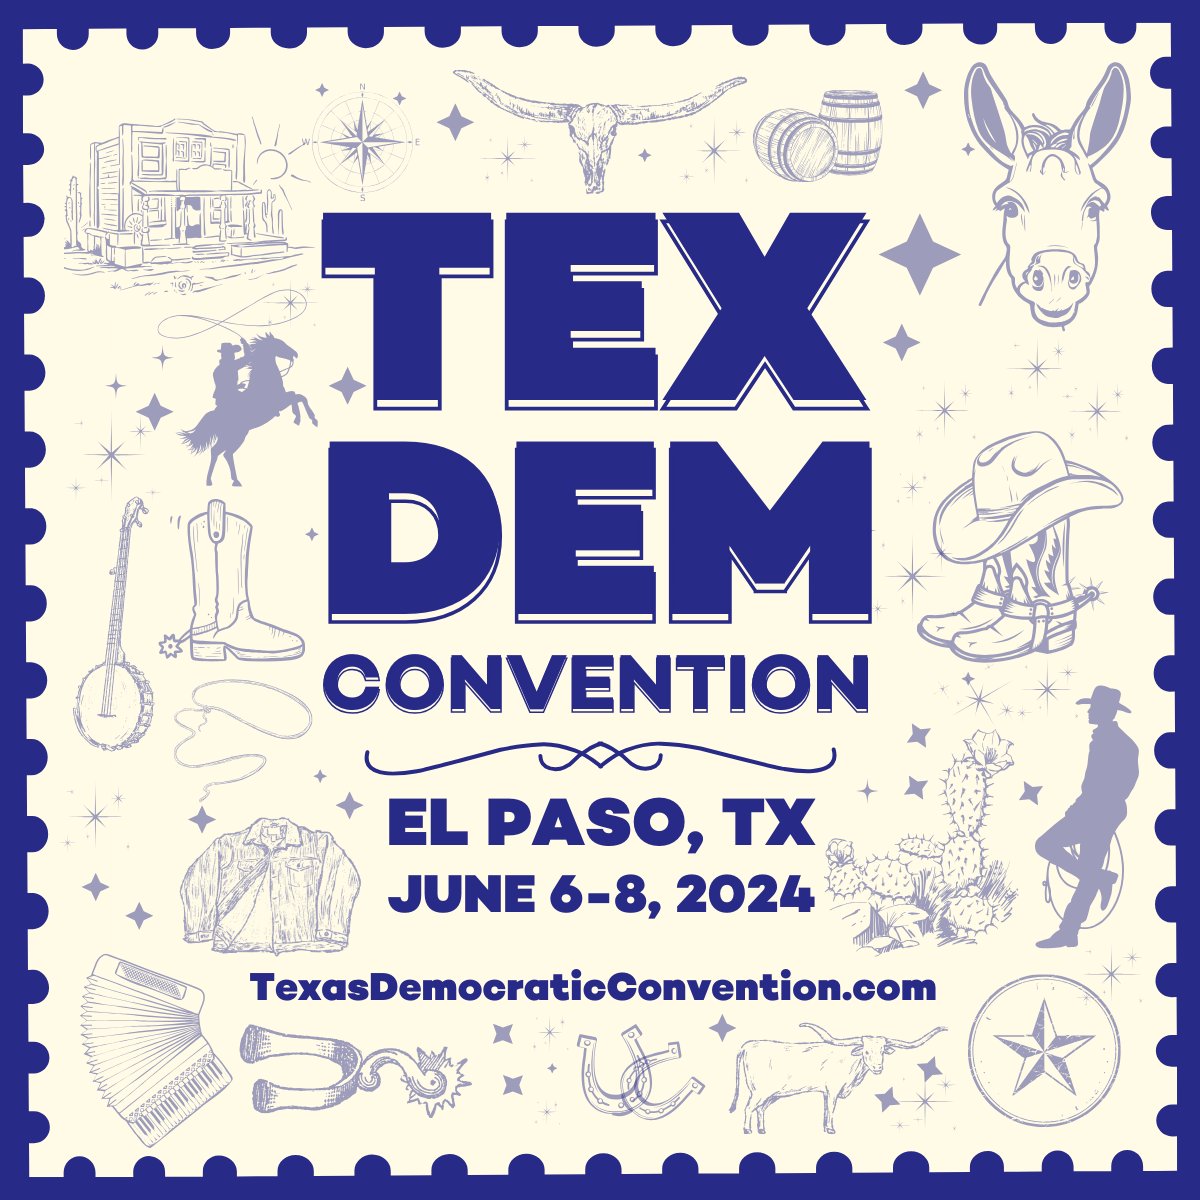 Introducing the 2024 Texas Democratic Convention logo. We'll see you in El Paso this June! ➡️txdem.co/ConventionRSVP #TXDems24